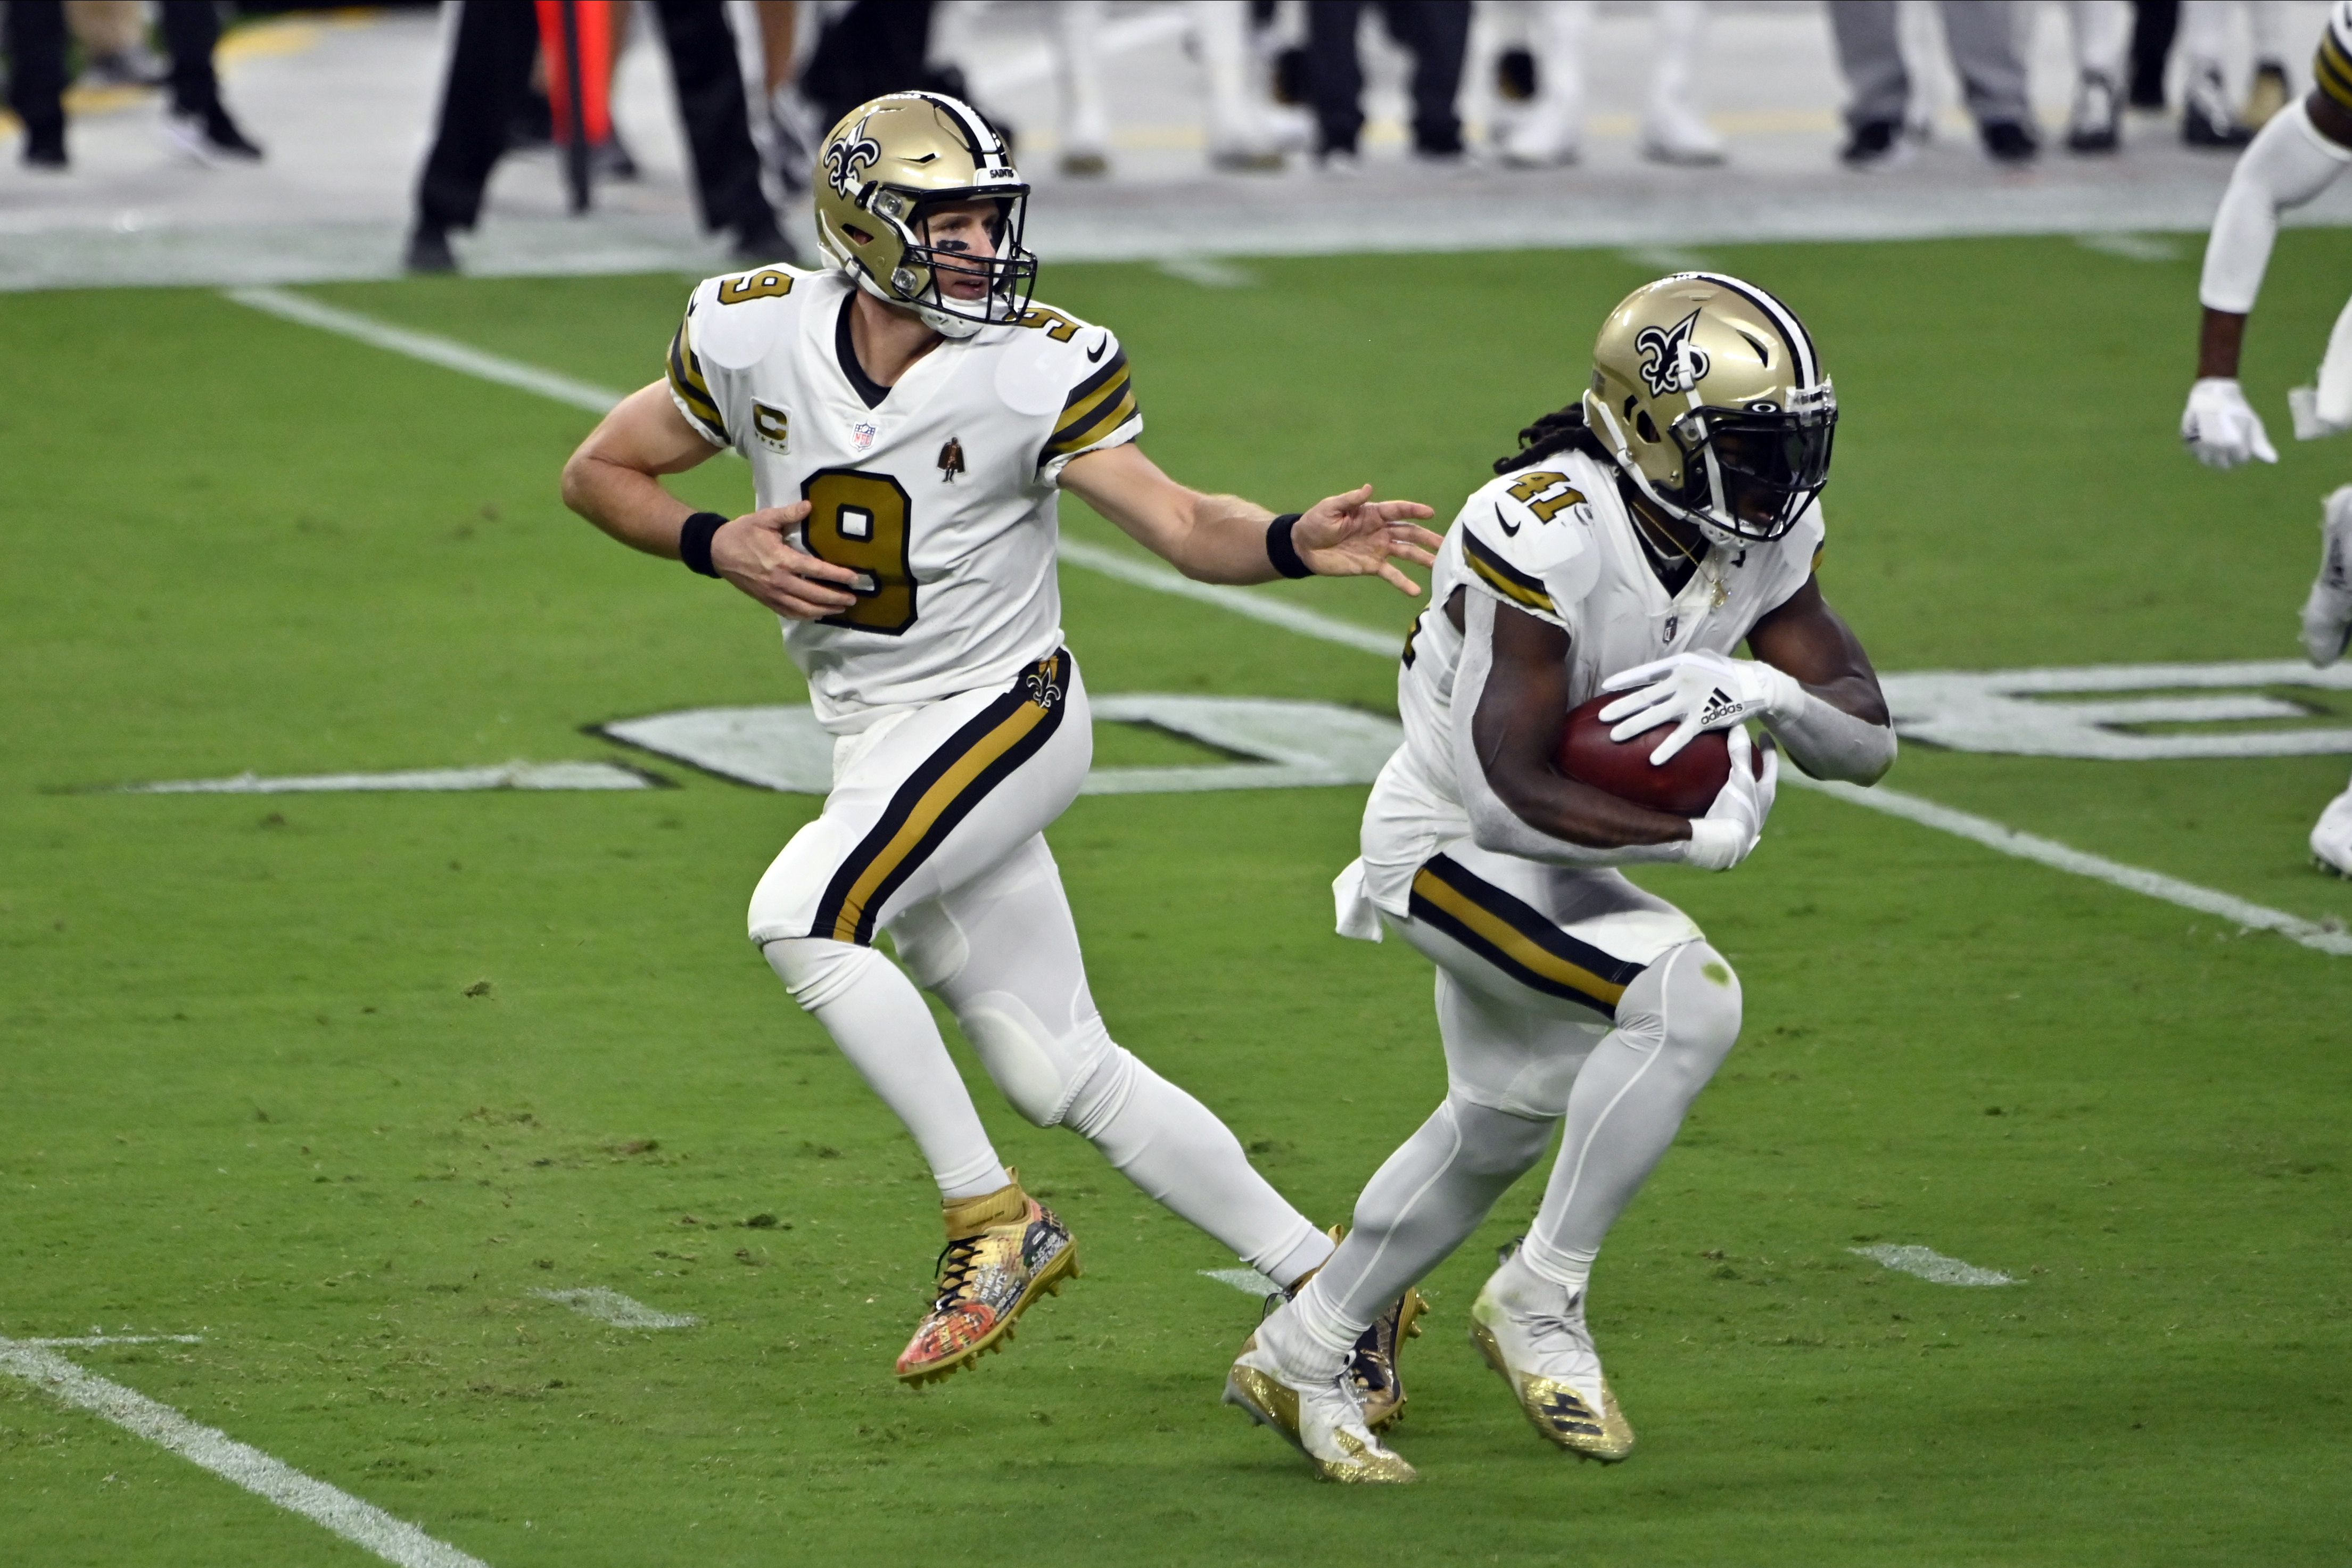 Saints vs. Packers live stream: TV channel, how to watch